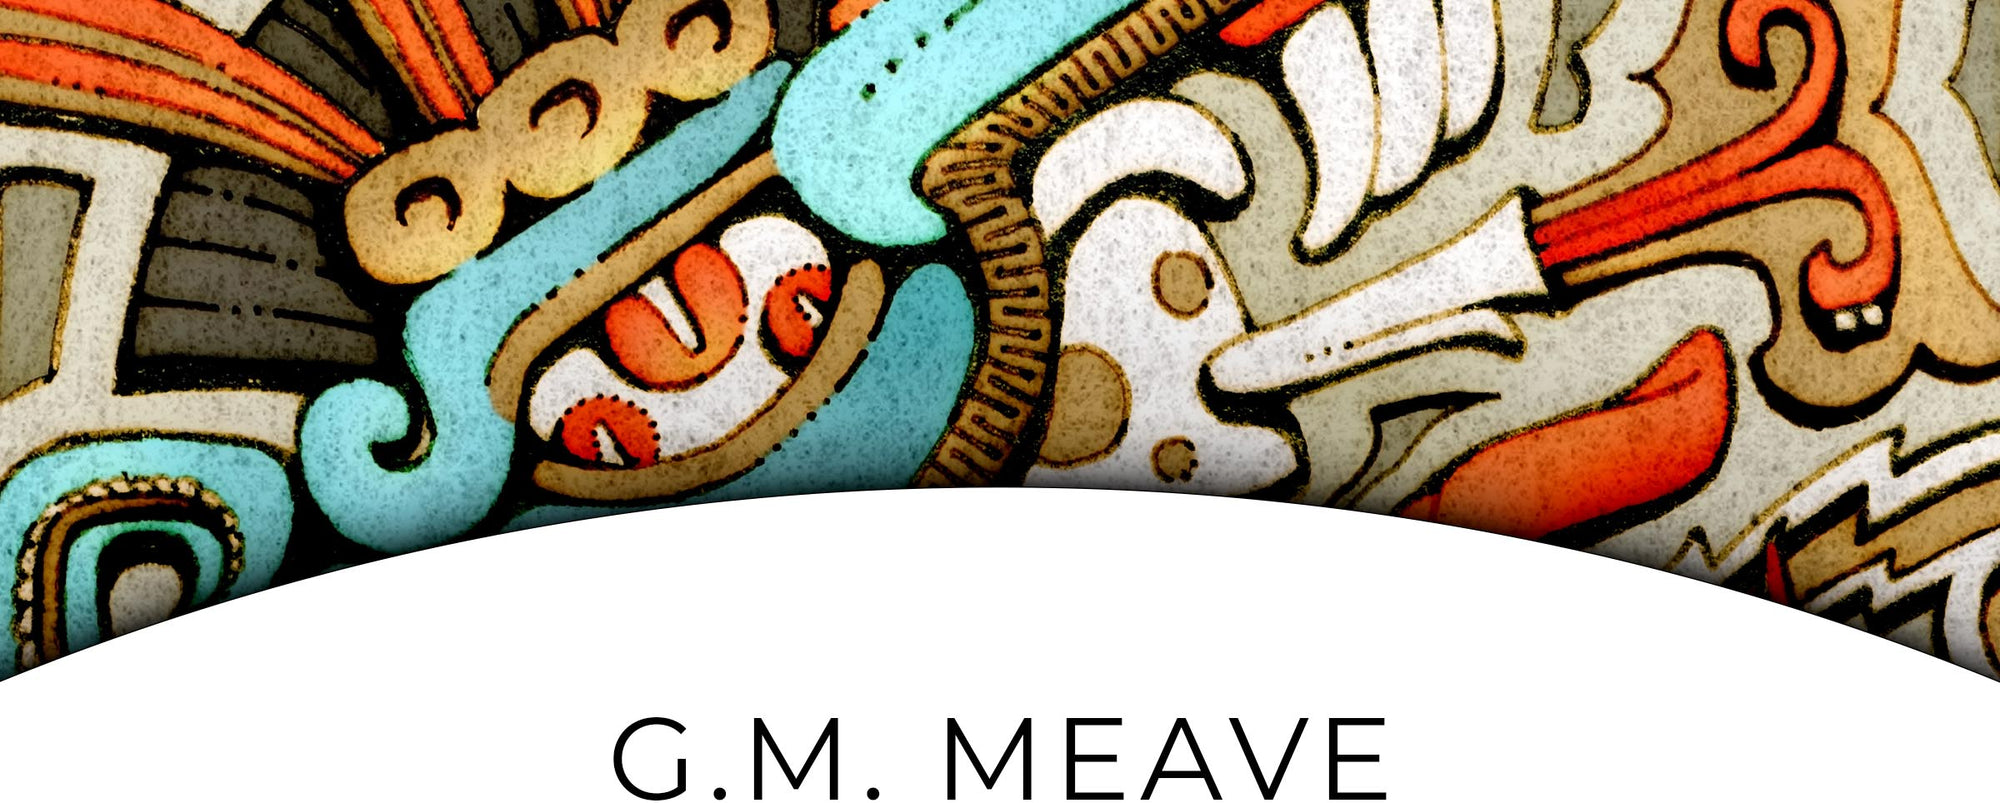 G. M. MEAVE